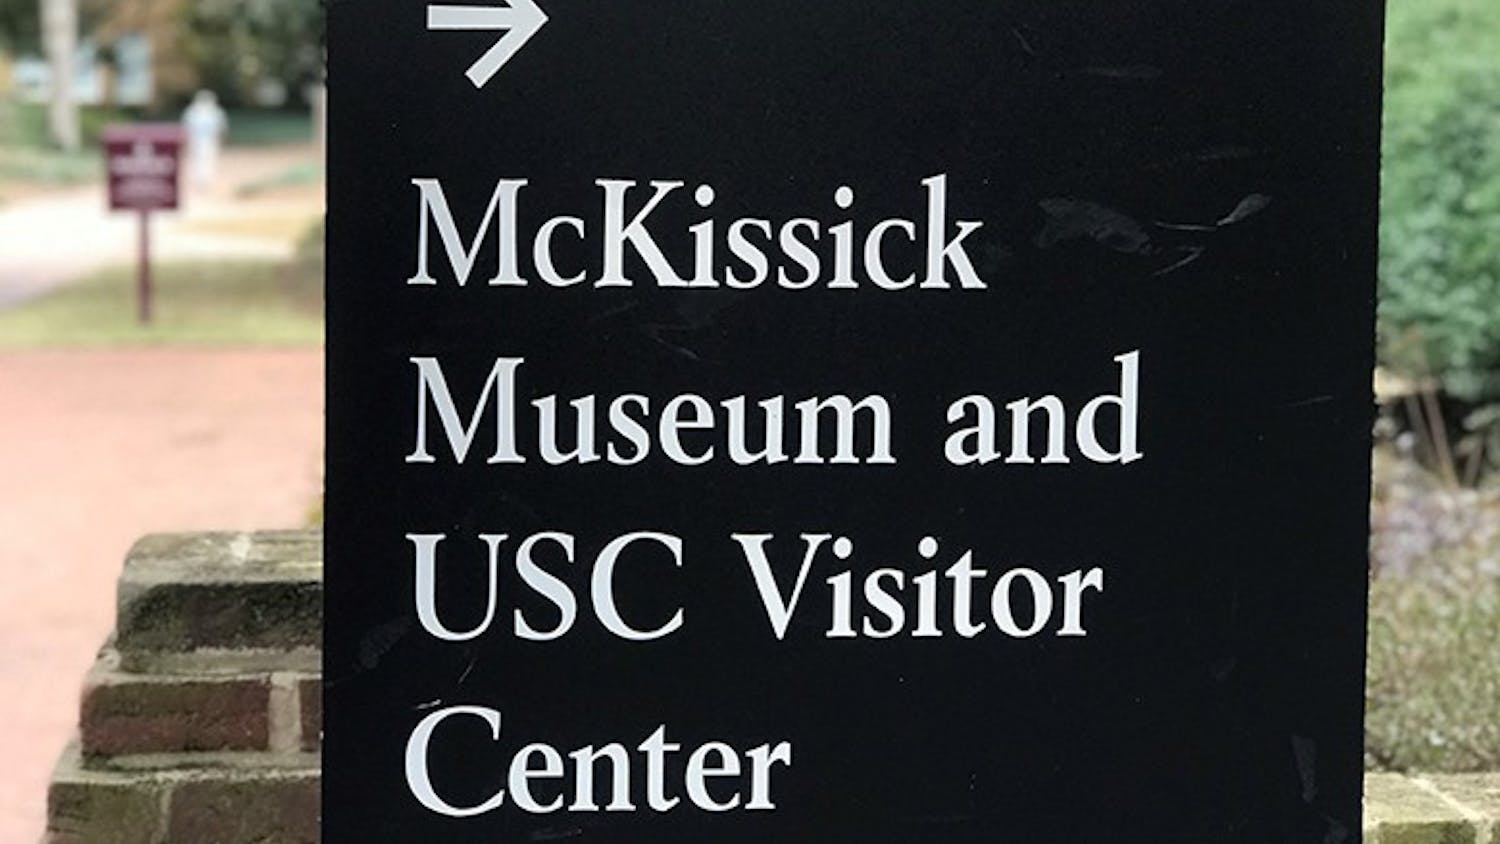 &nbsp;A university sign points toward the direction of the McKissick Museum, which is located just off the Horseshoe. The museum has been home to multiple exhibits in the past but is currently home to "Child's Play,” which was created by Leslie Yarborough.